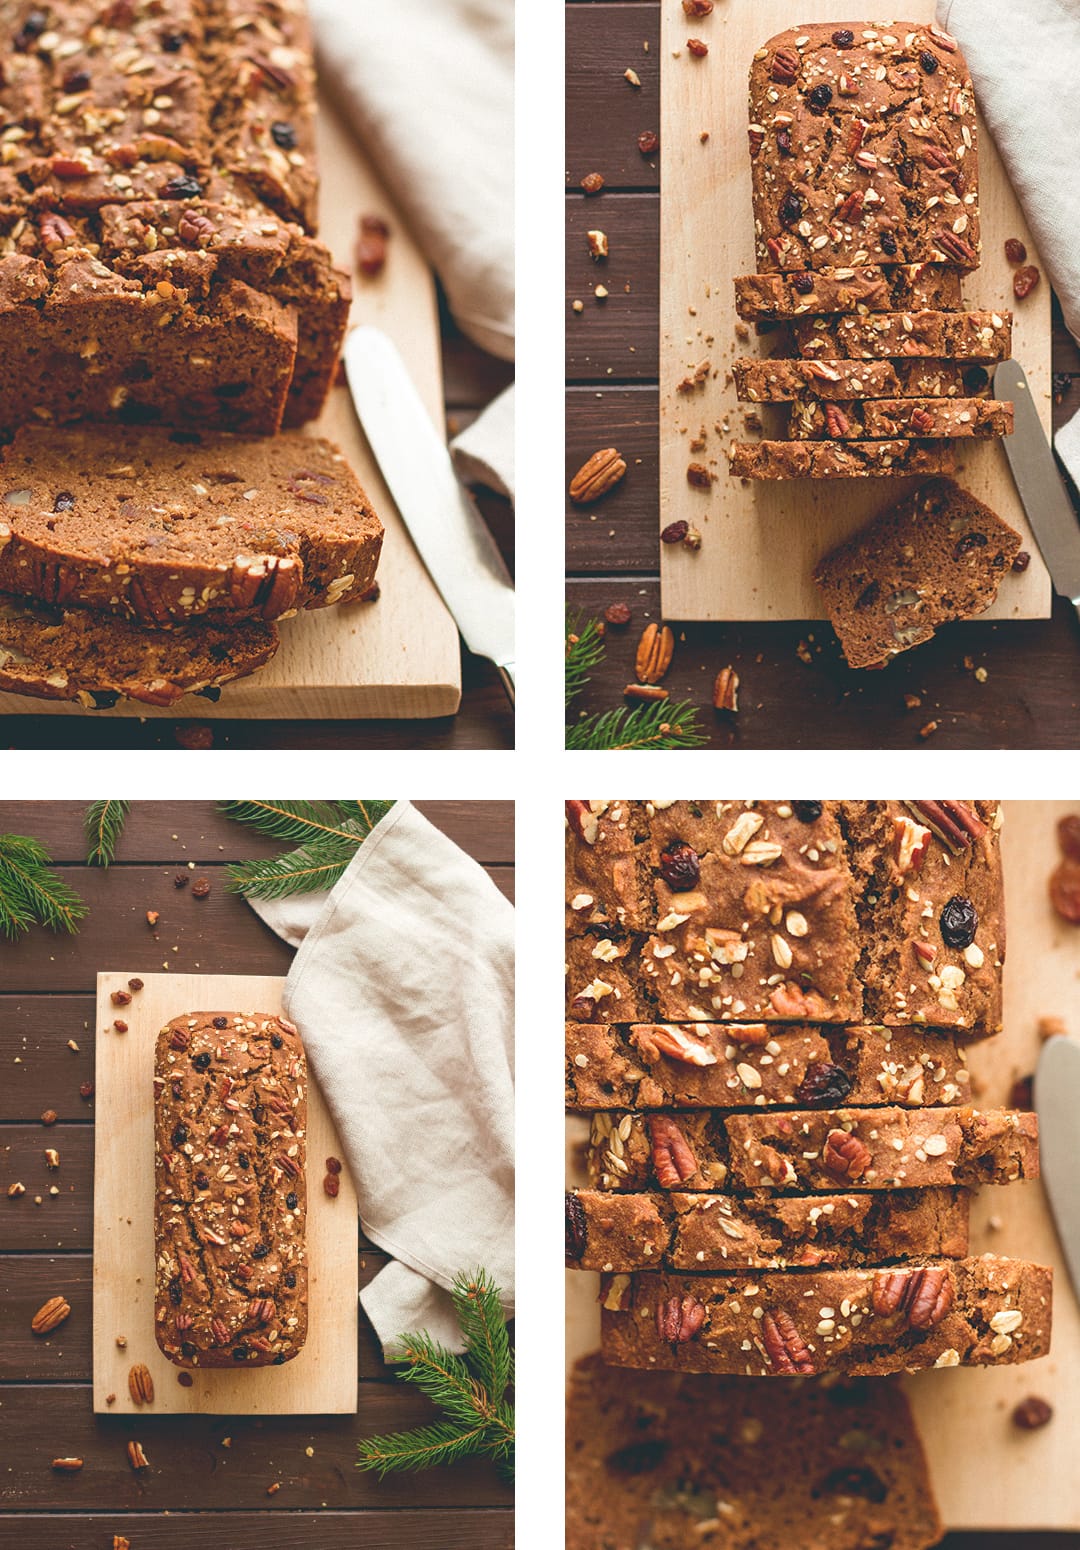 Christmas Spiced Bread with Nuts and Dried Fruit (vegan, gluten-free) - this bread is the perfect start to a crispy Christmas morning. You'll love this recipe! | thehealthfulideas.com